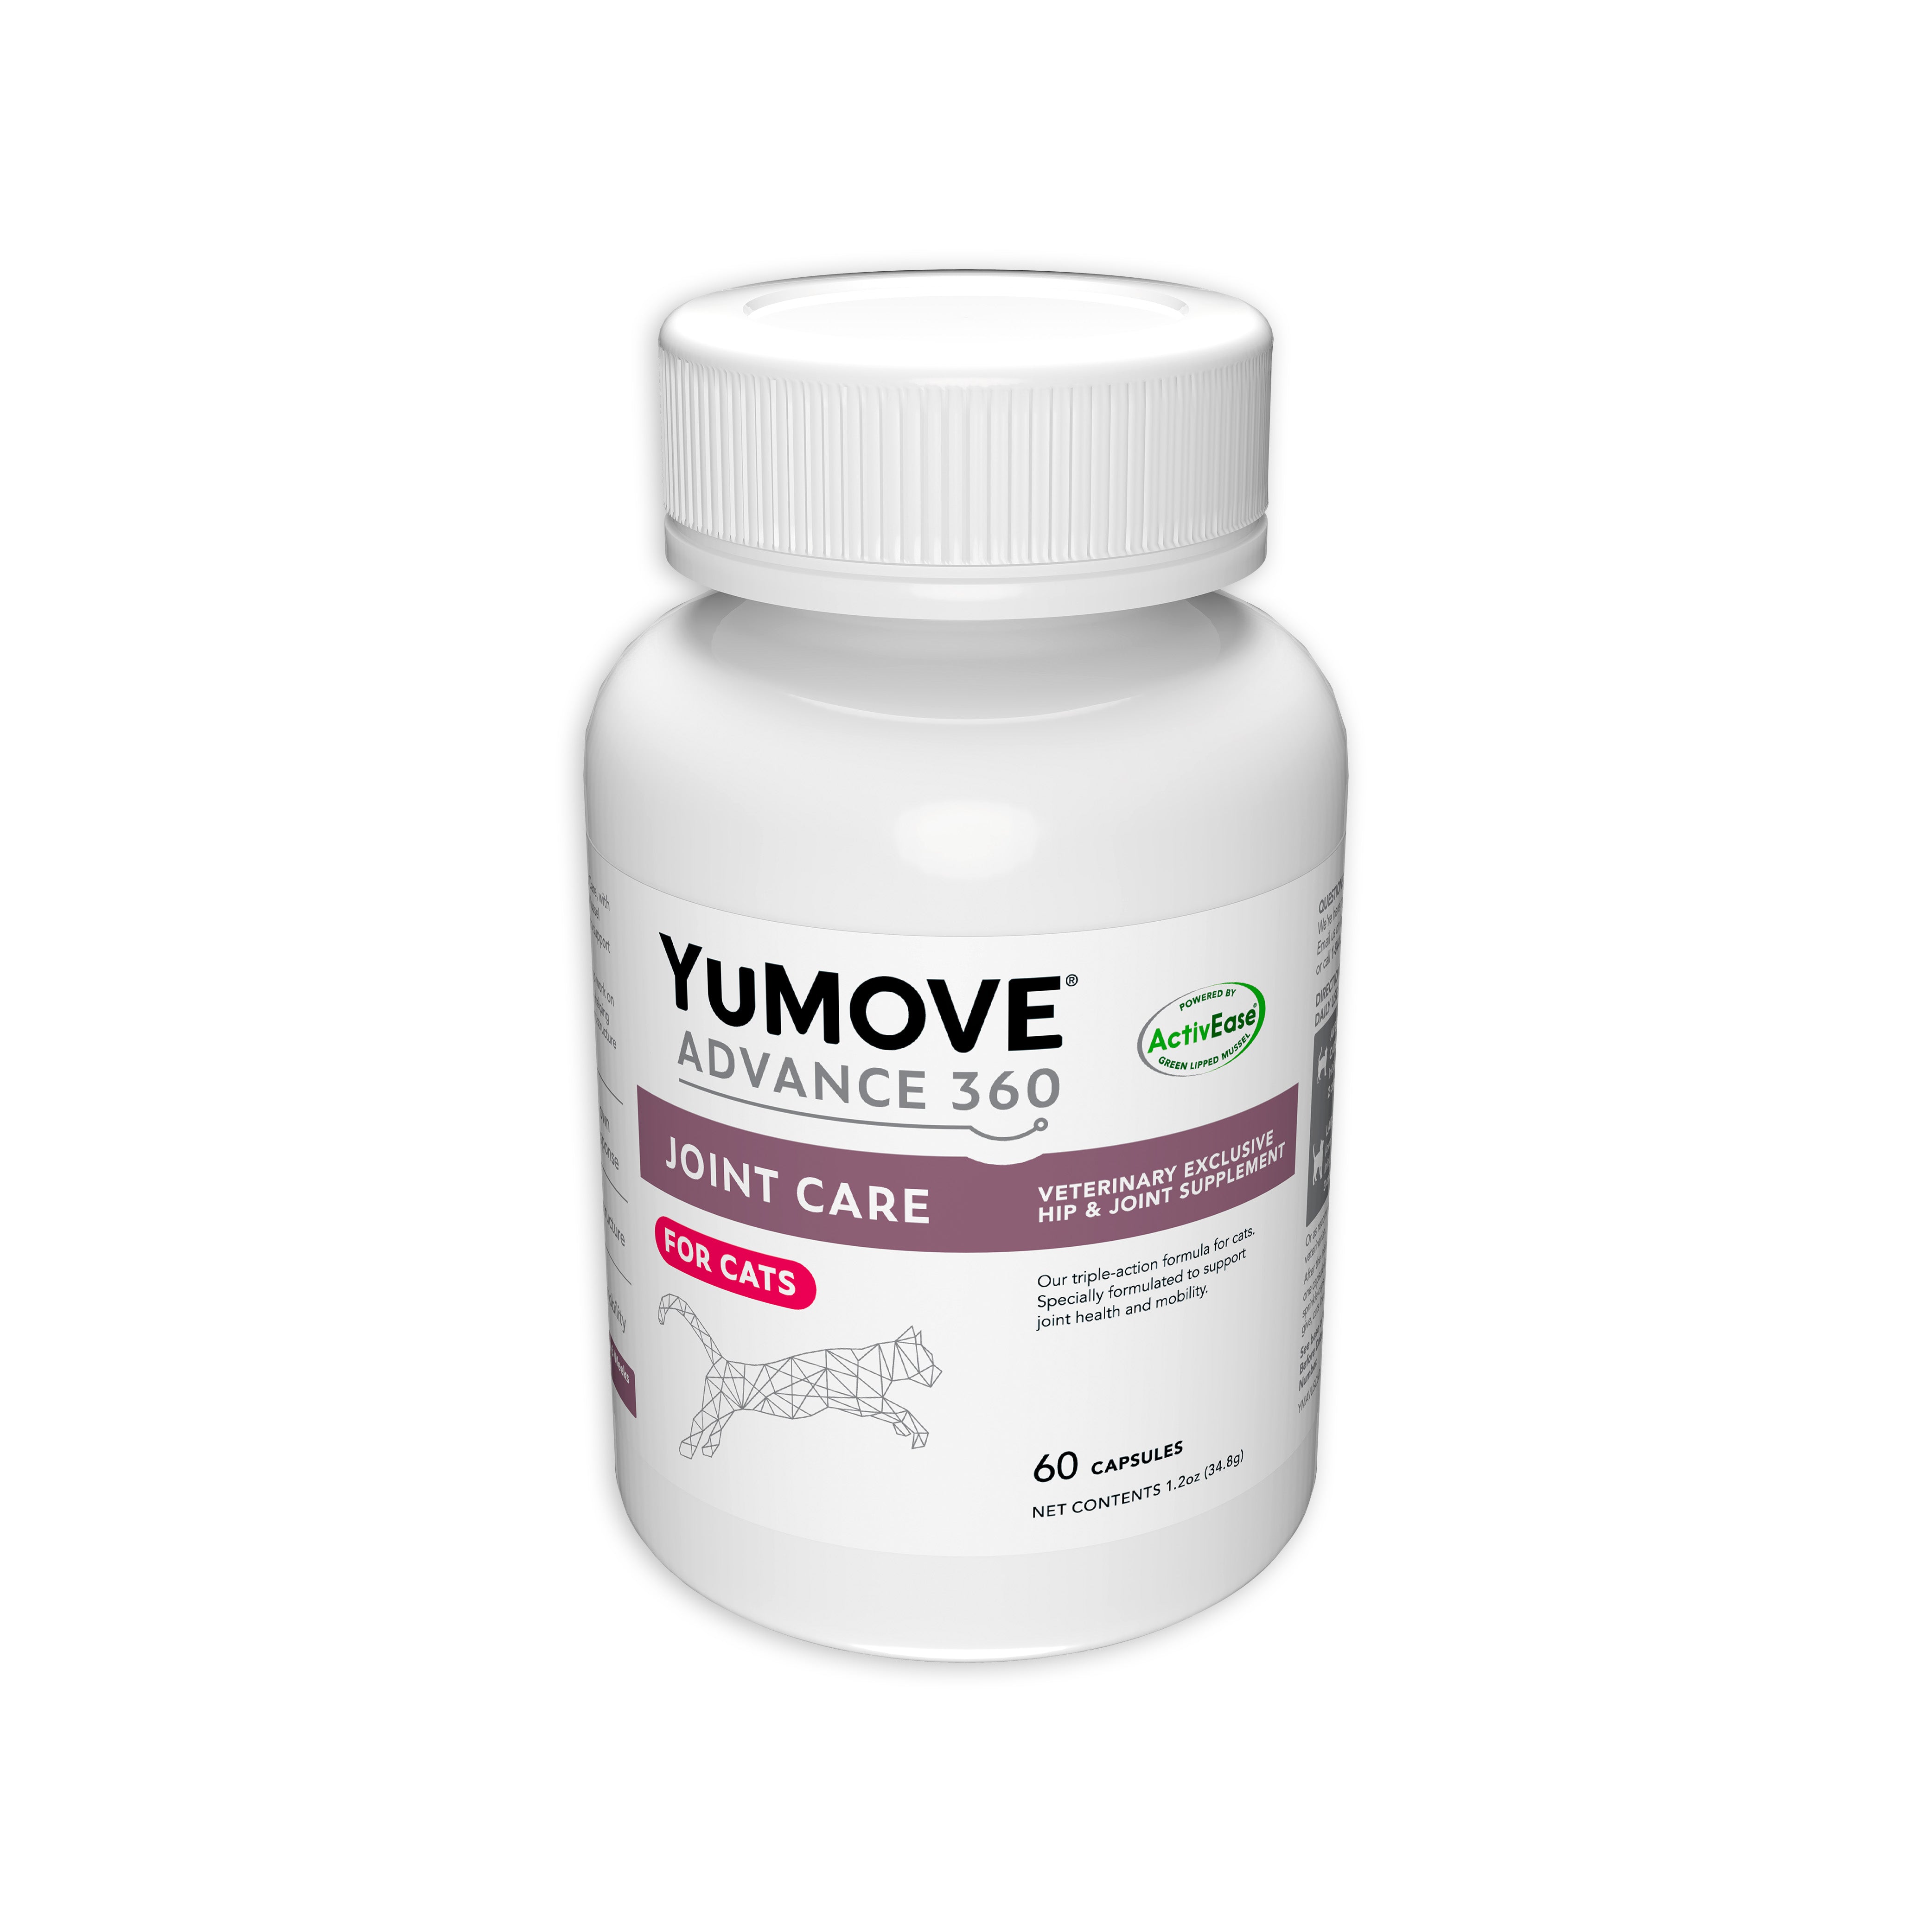 A white bottle of YuMOVE ADVANCE 360 Joint Care for Cats, with a geometric wireframe cat illustration, labeled as a veterinary exclusive hip & joint supplement, containing 60 capsules with net contents of 1.2 oz (34g).